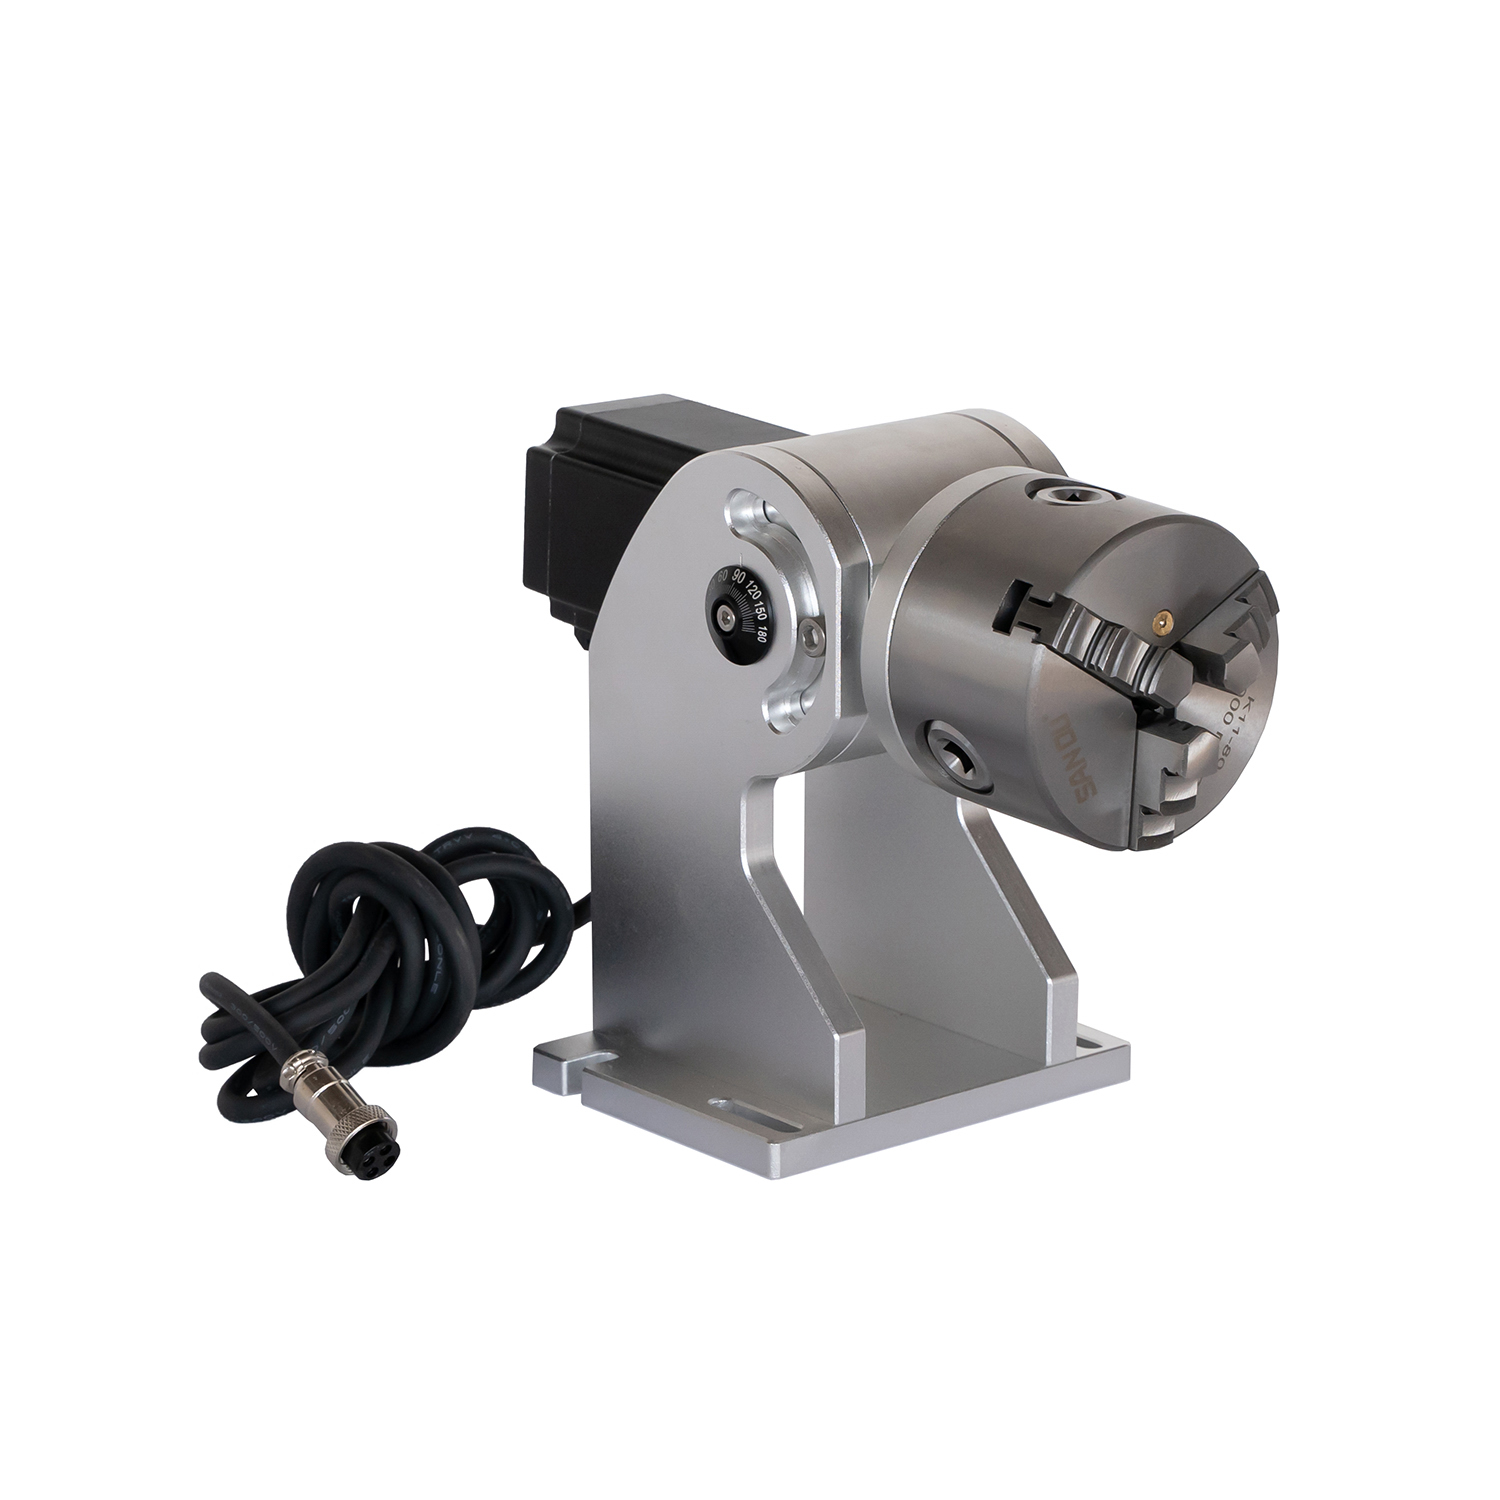 80mm 100mm 125mm 160mm 200mm Rotary Attachment for Fiber CO2 Laser Marking Machine 